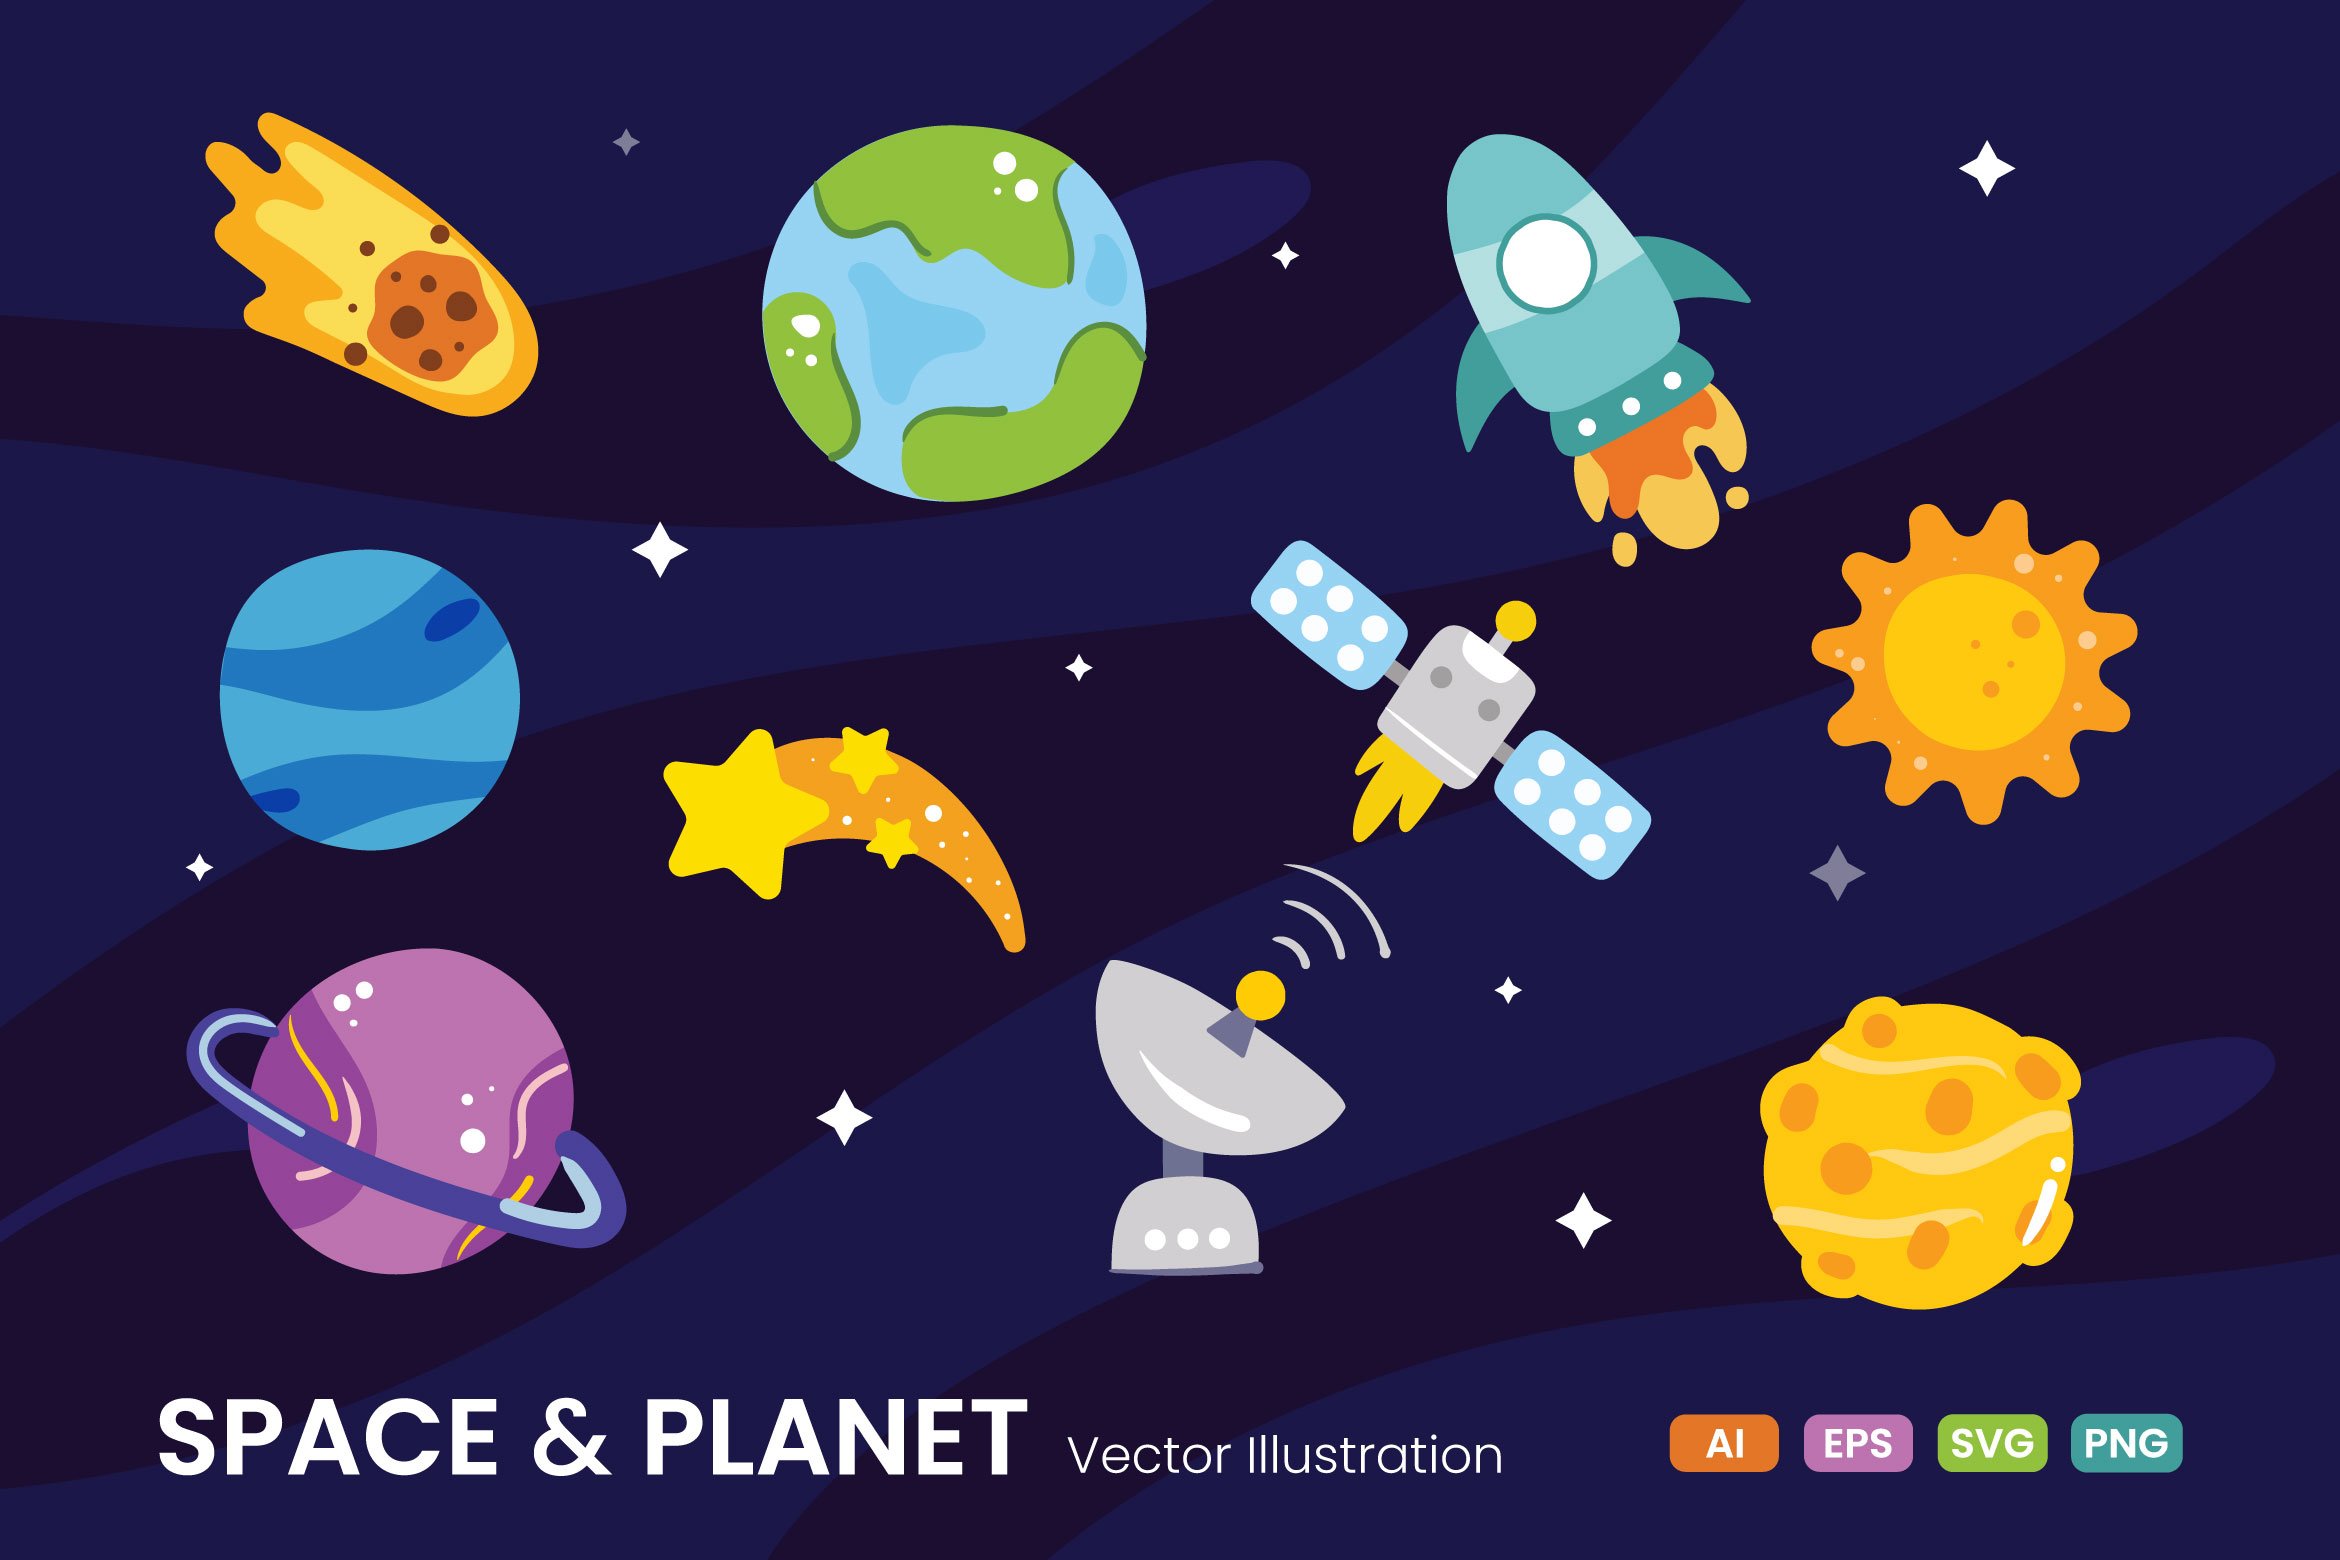 Space and Planet Illustration cover image.